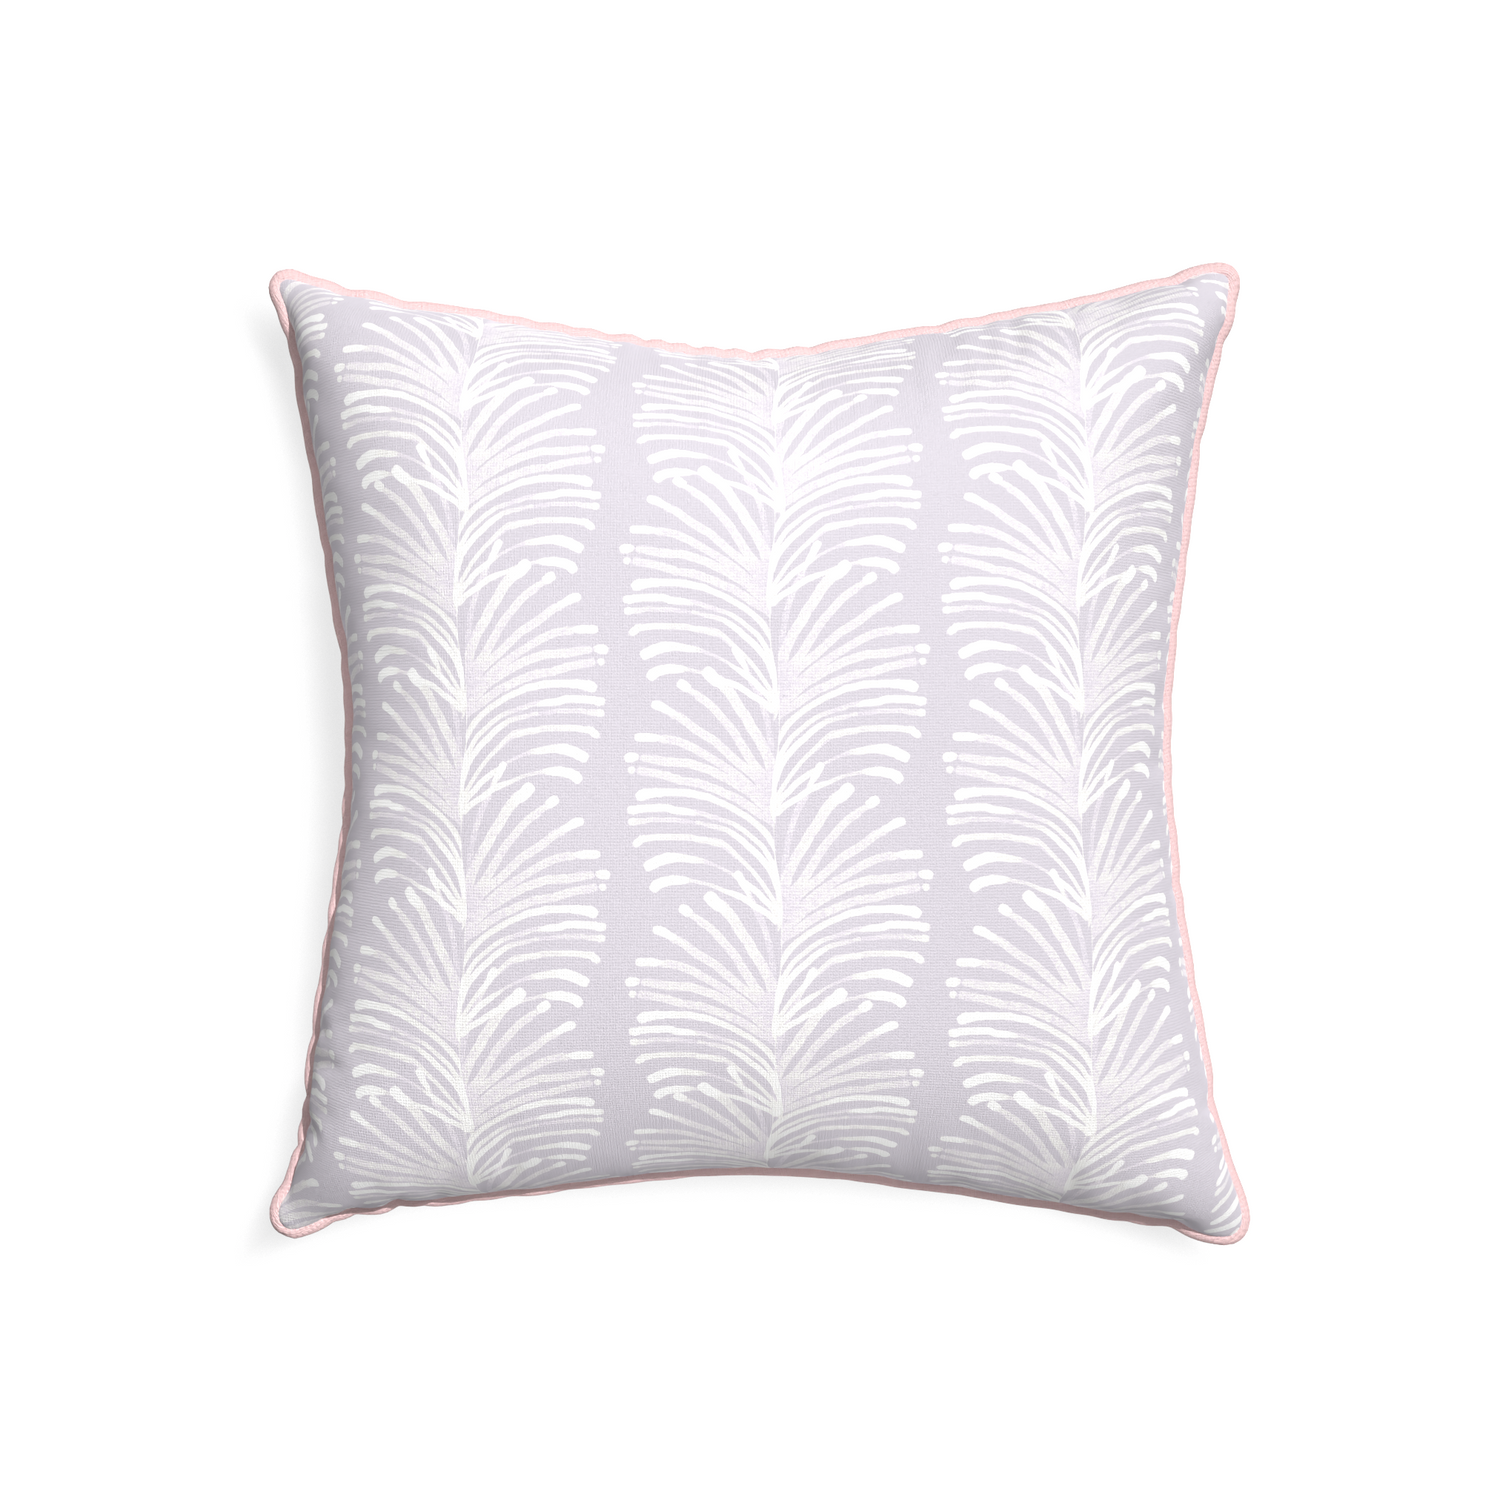 22-square emma lavender custom lavender botanical stripepillow with petal piping on white background